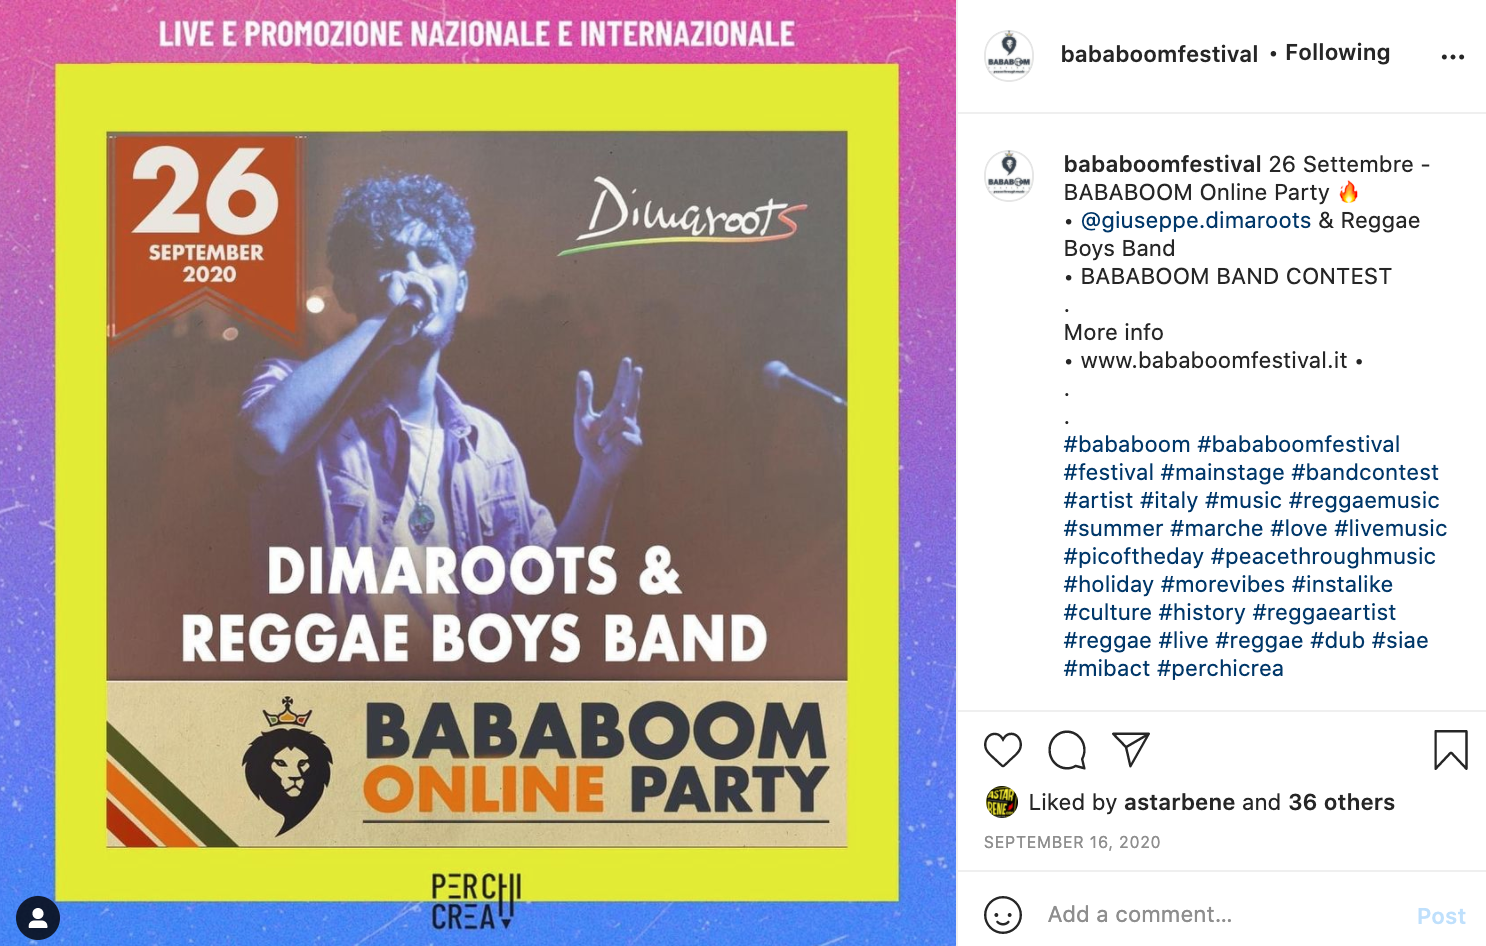 In 2020, as in-person activities were cancelled due to the COVID-19 pandemic in Italy, Bababoom Festival organized a number of online performances in lieu of their usual programming to sustain their engagement with their audience by using social media. 